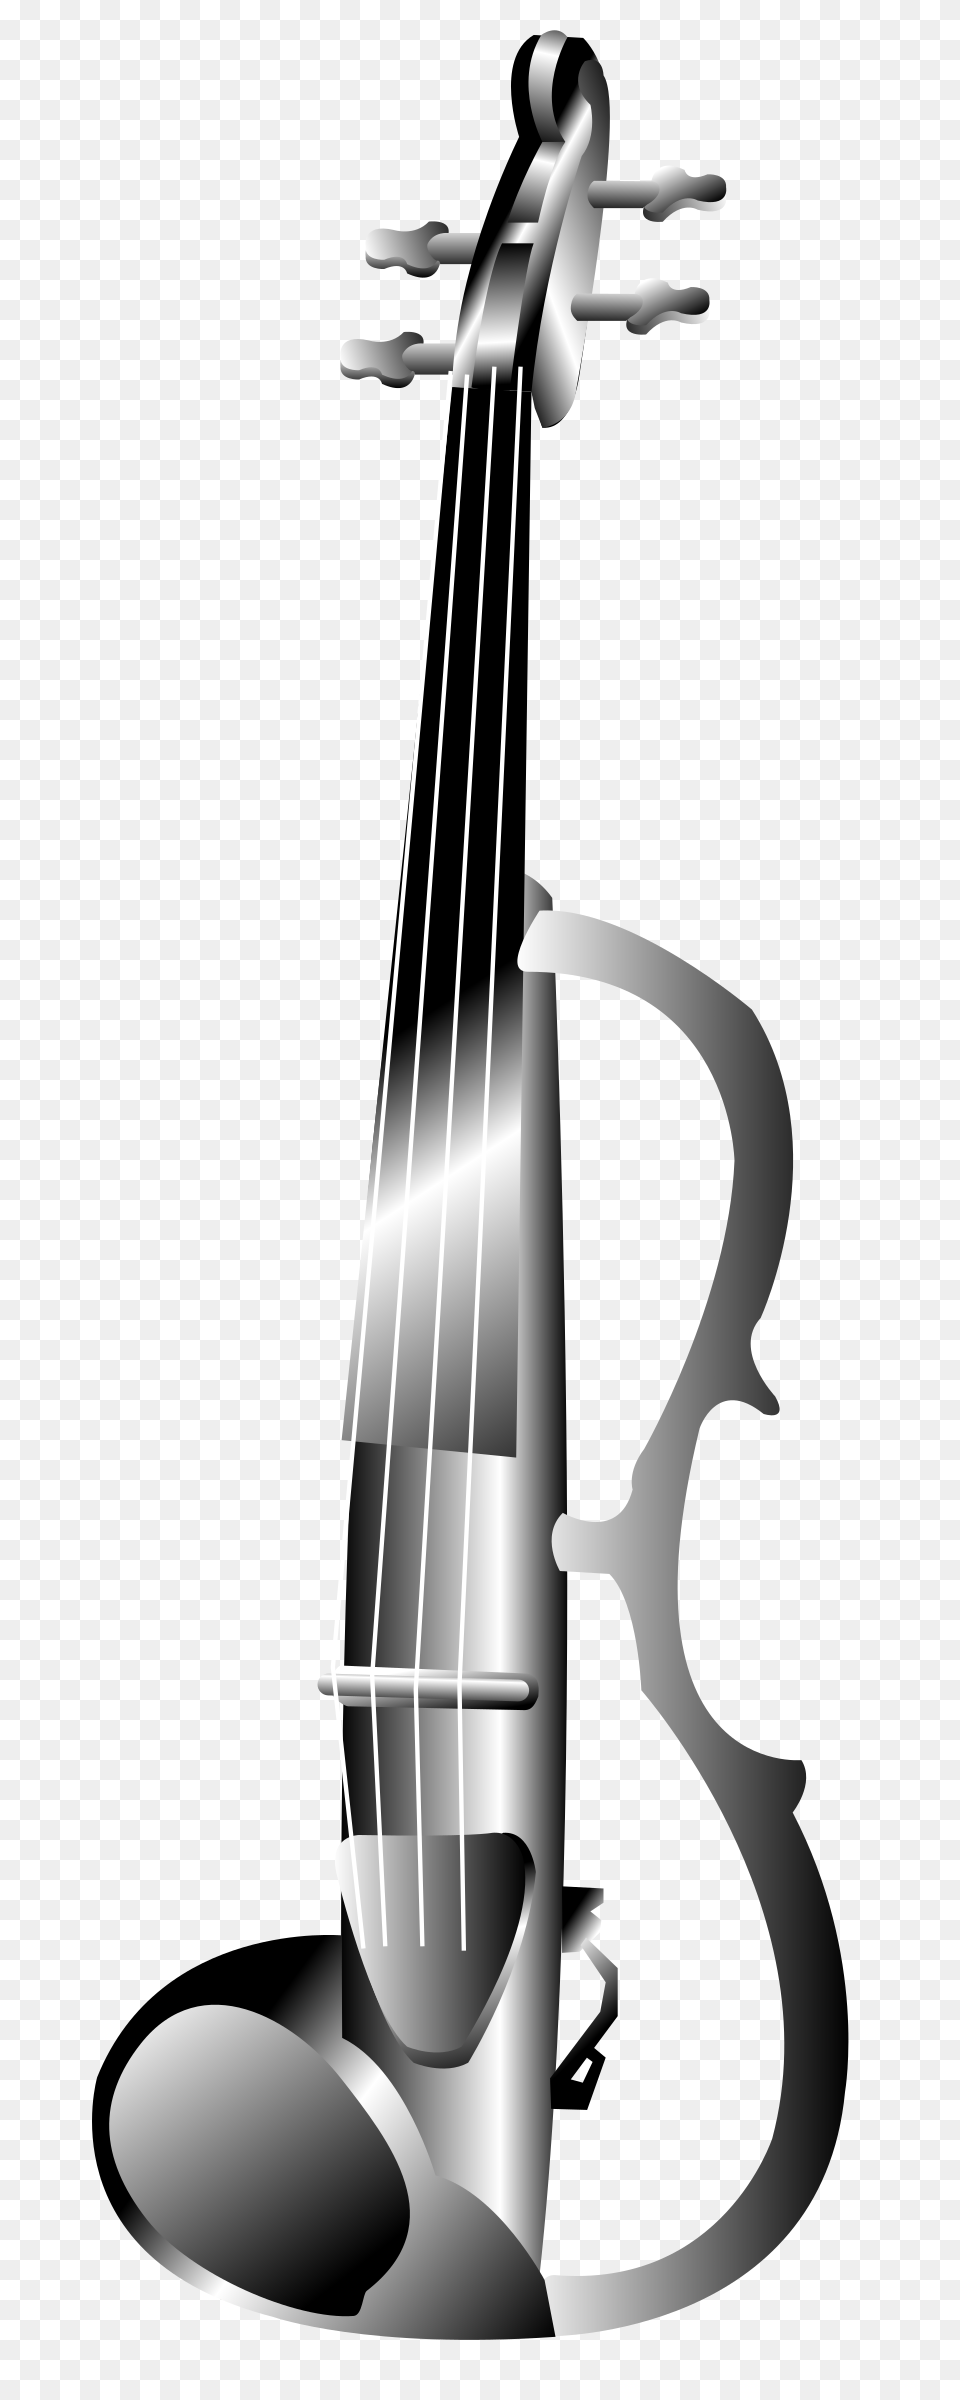 Electric Violns, Musical Instrument, Violin, Sword, Weapon Png Image